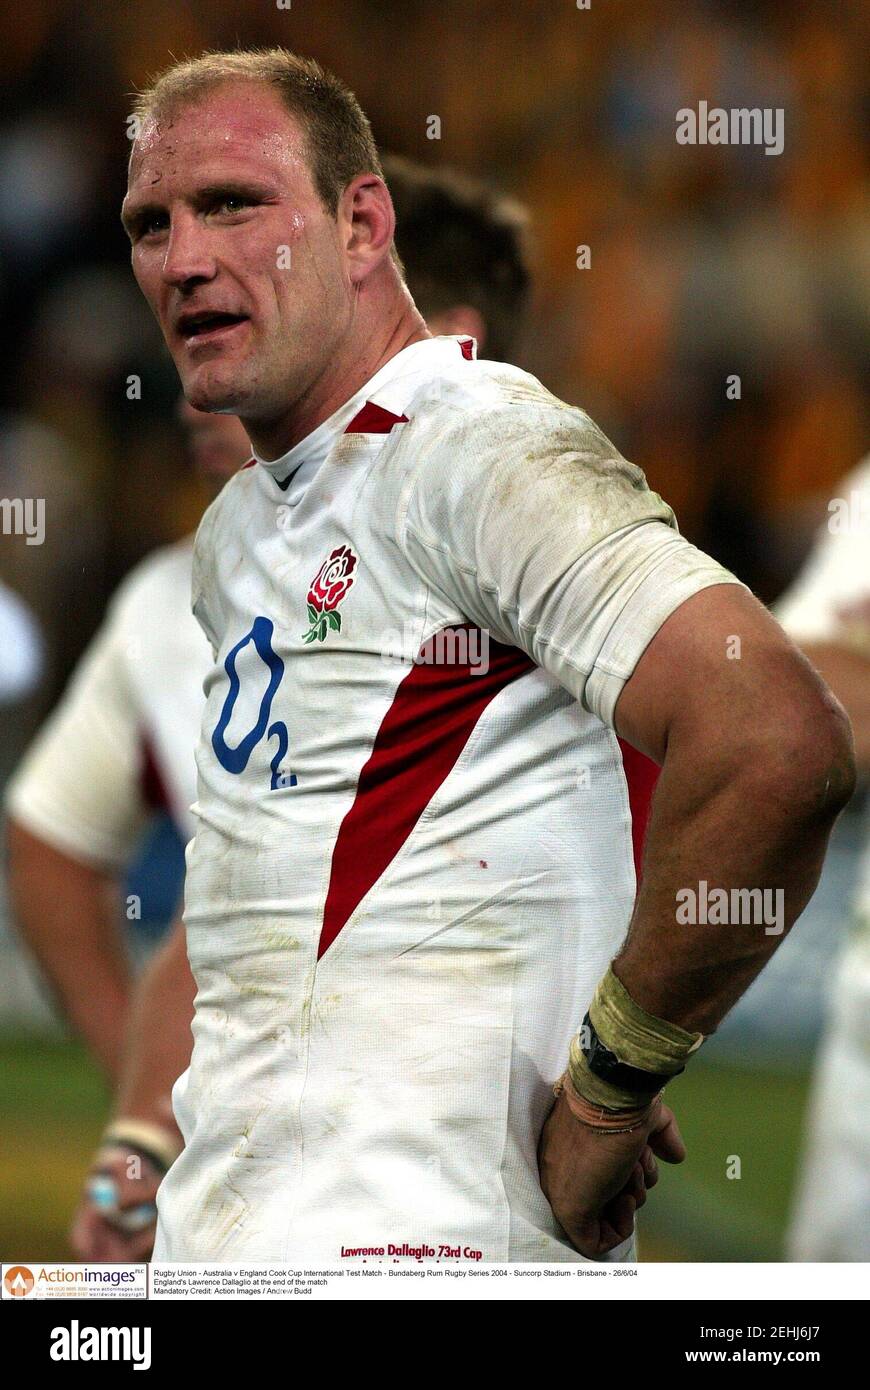 Rugby Union - Australia v England Cook Cup International Test Match - Bundaberg Rum Rugby Series 2004 - Suncorp Stadium - Brisbane - 26/6/04  England's Lawrence Dallaglio at the end of the match  Mandatory Credit: Action Images / Andrew Budd Stock Photo